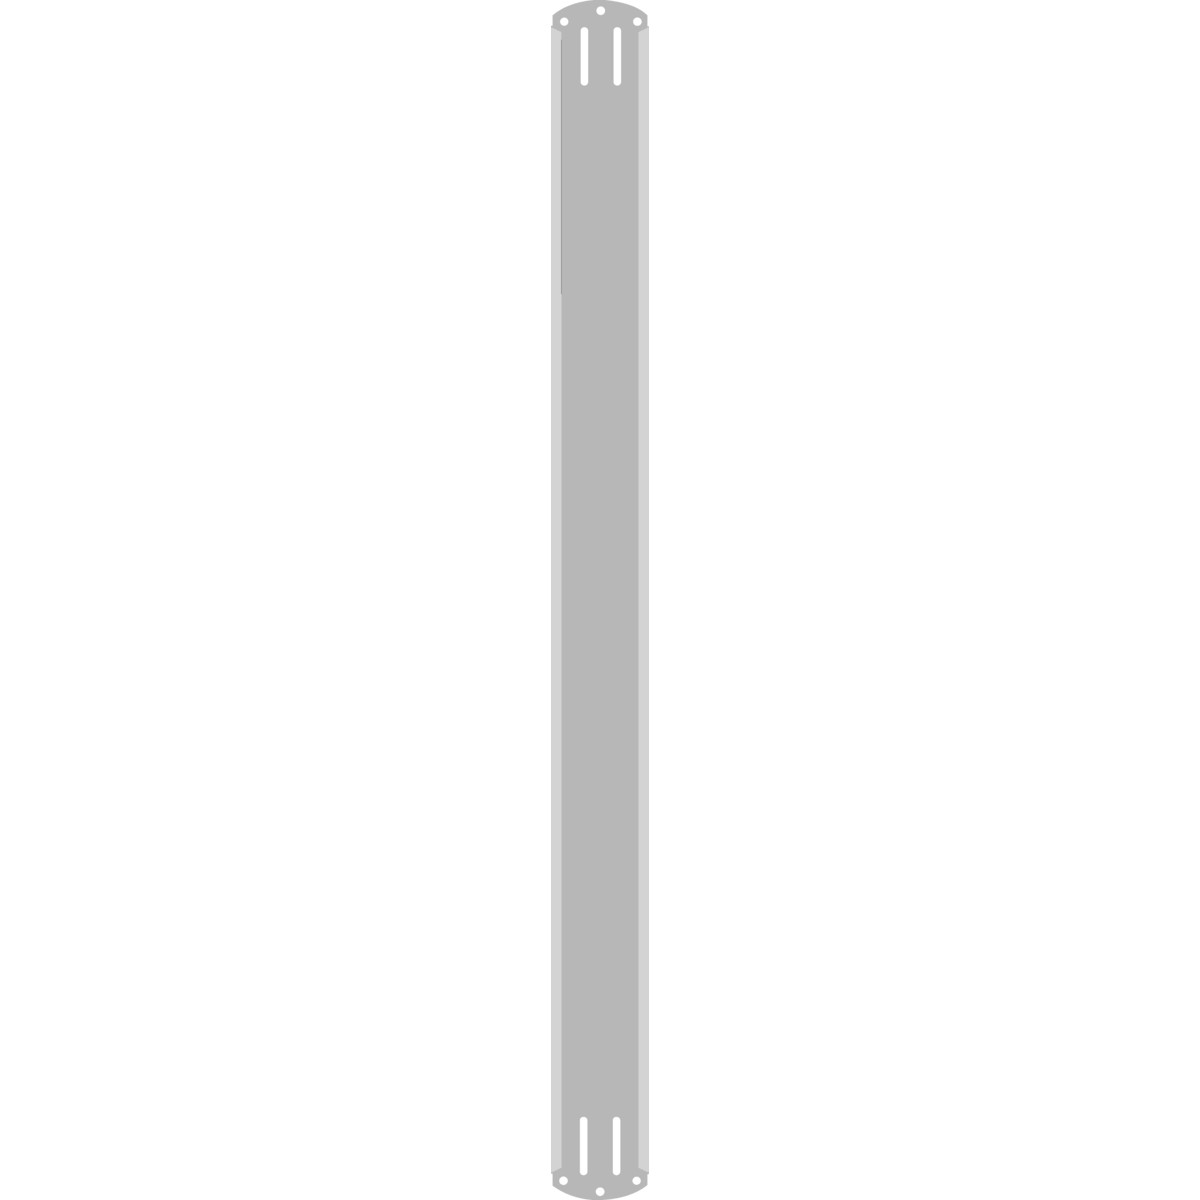 2" Vertical Character  Aluminum Holder - Fits 7 Characters